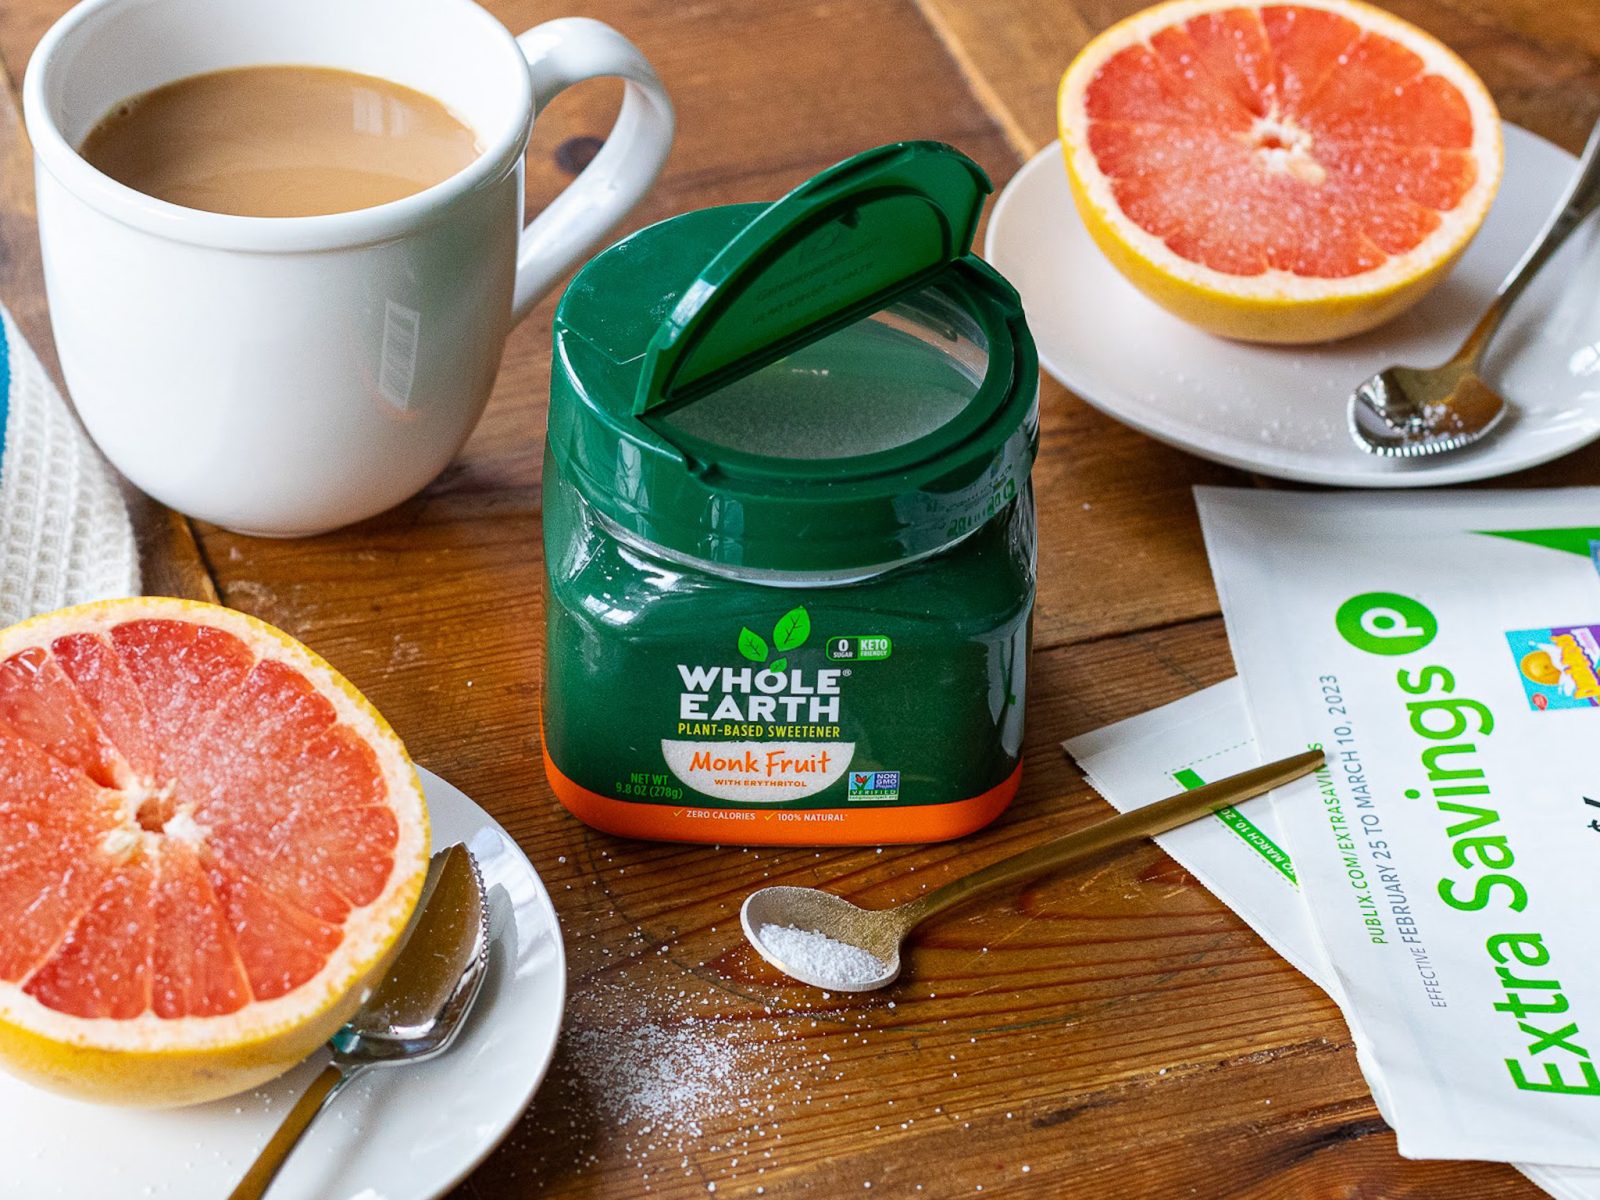 Introducing New Whole Earth® Monk Fruit with Erythritol Jars – Save Now at Publix